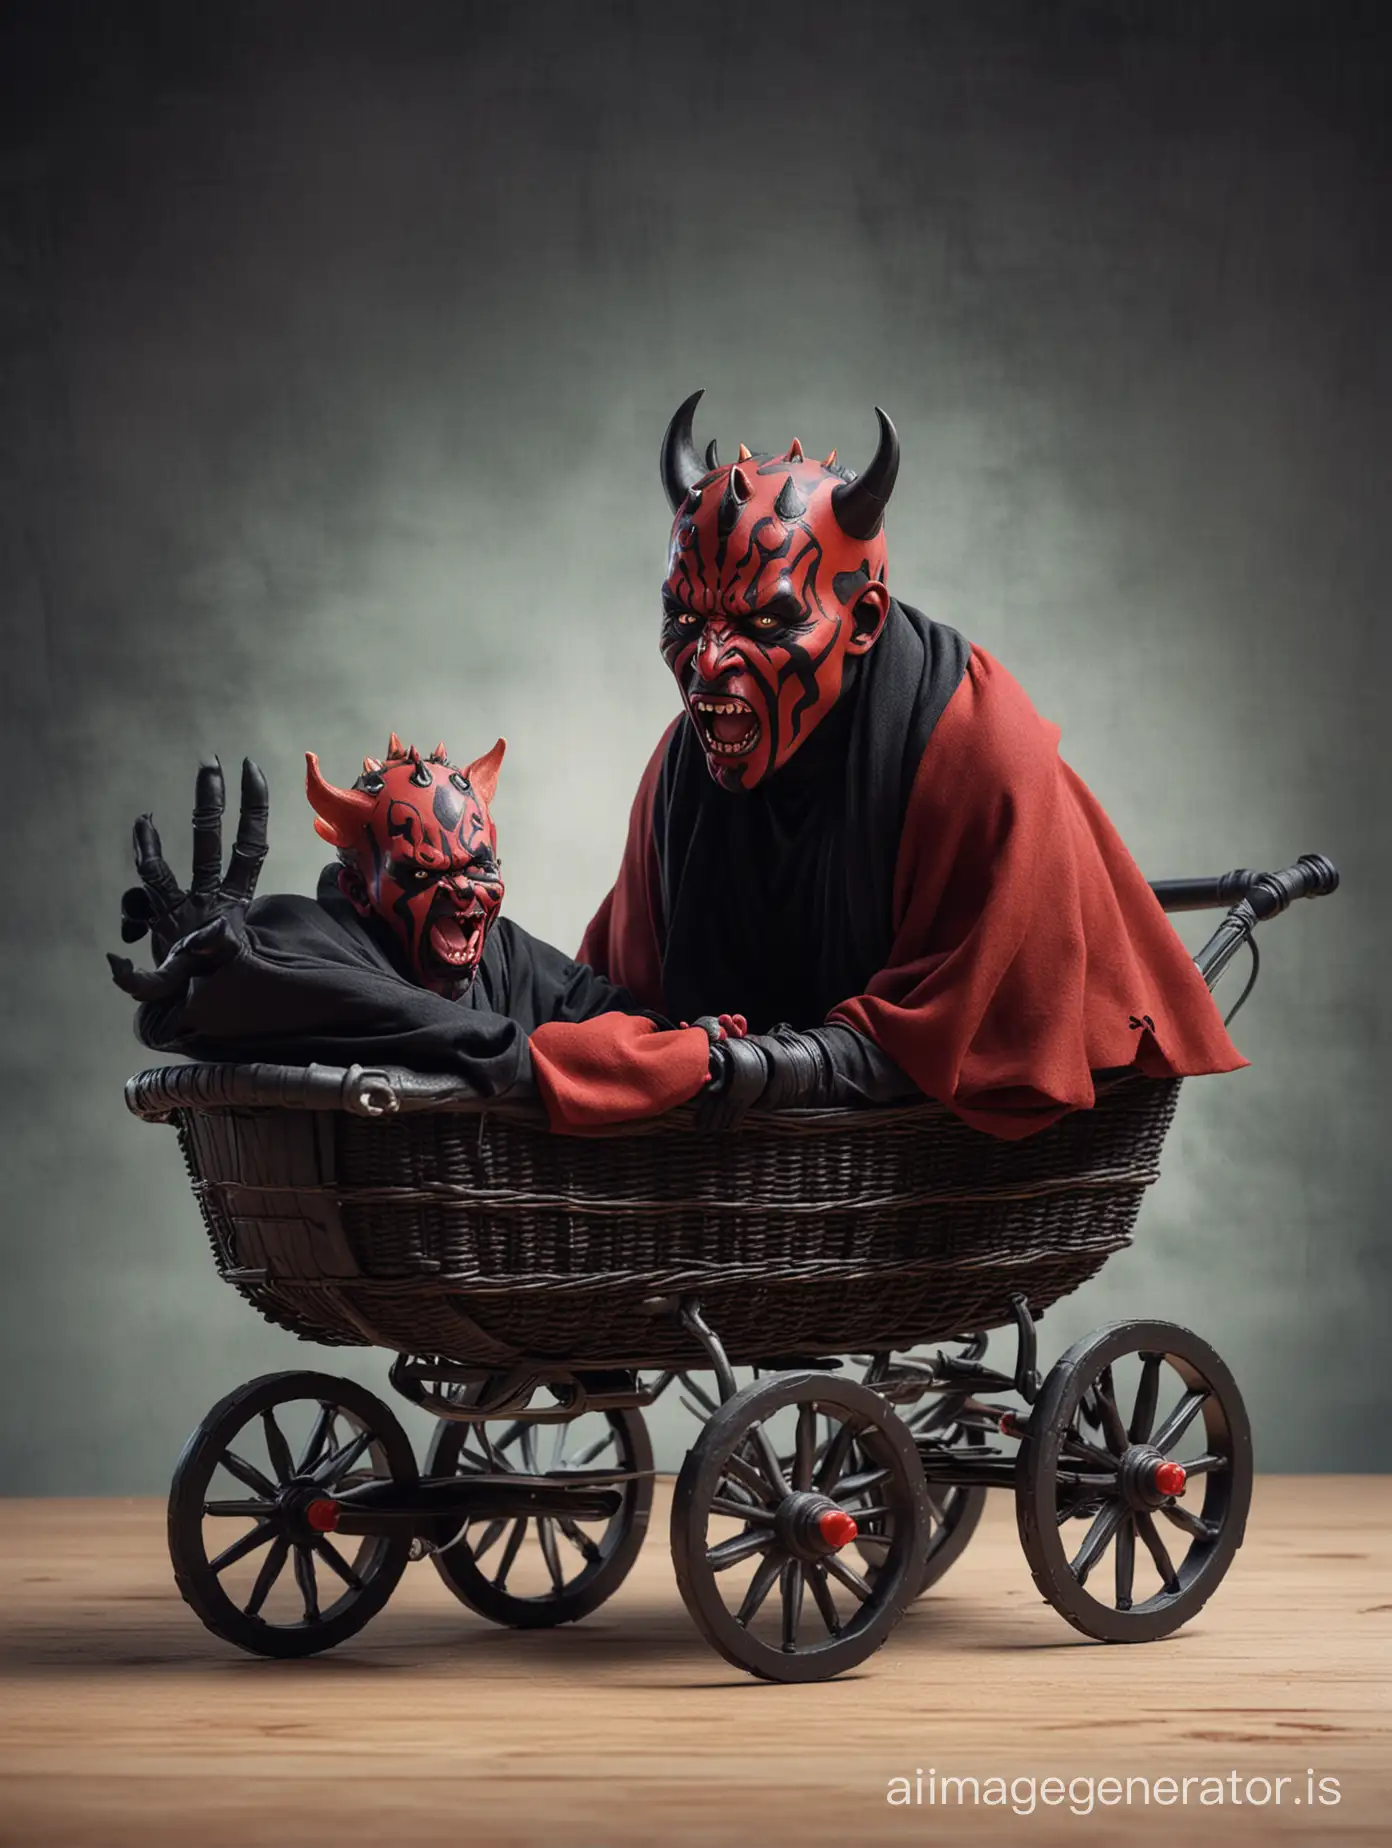 Darth-Maul-Intimidating-a-Baby-in-a-Carriage-Sith-Lord-Confrontation